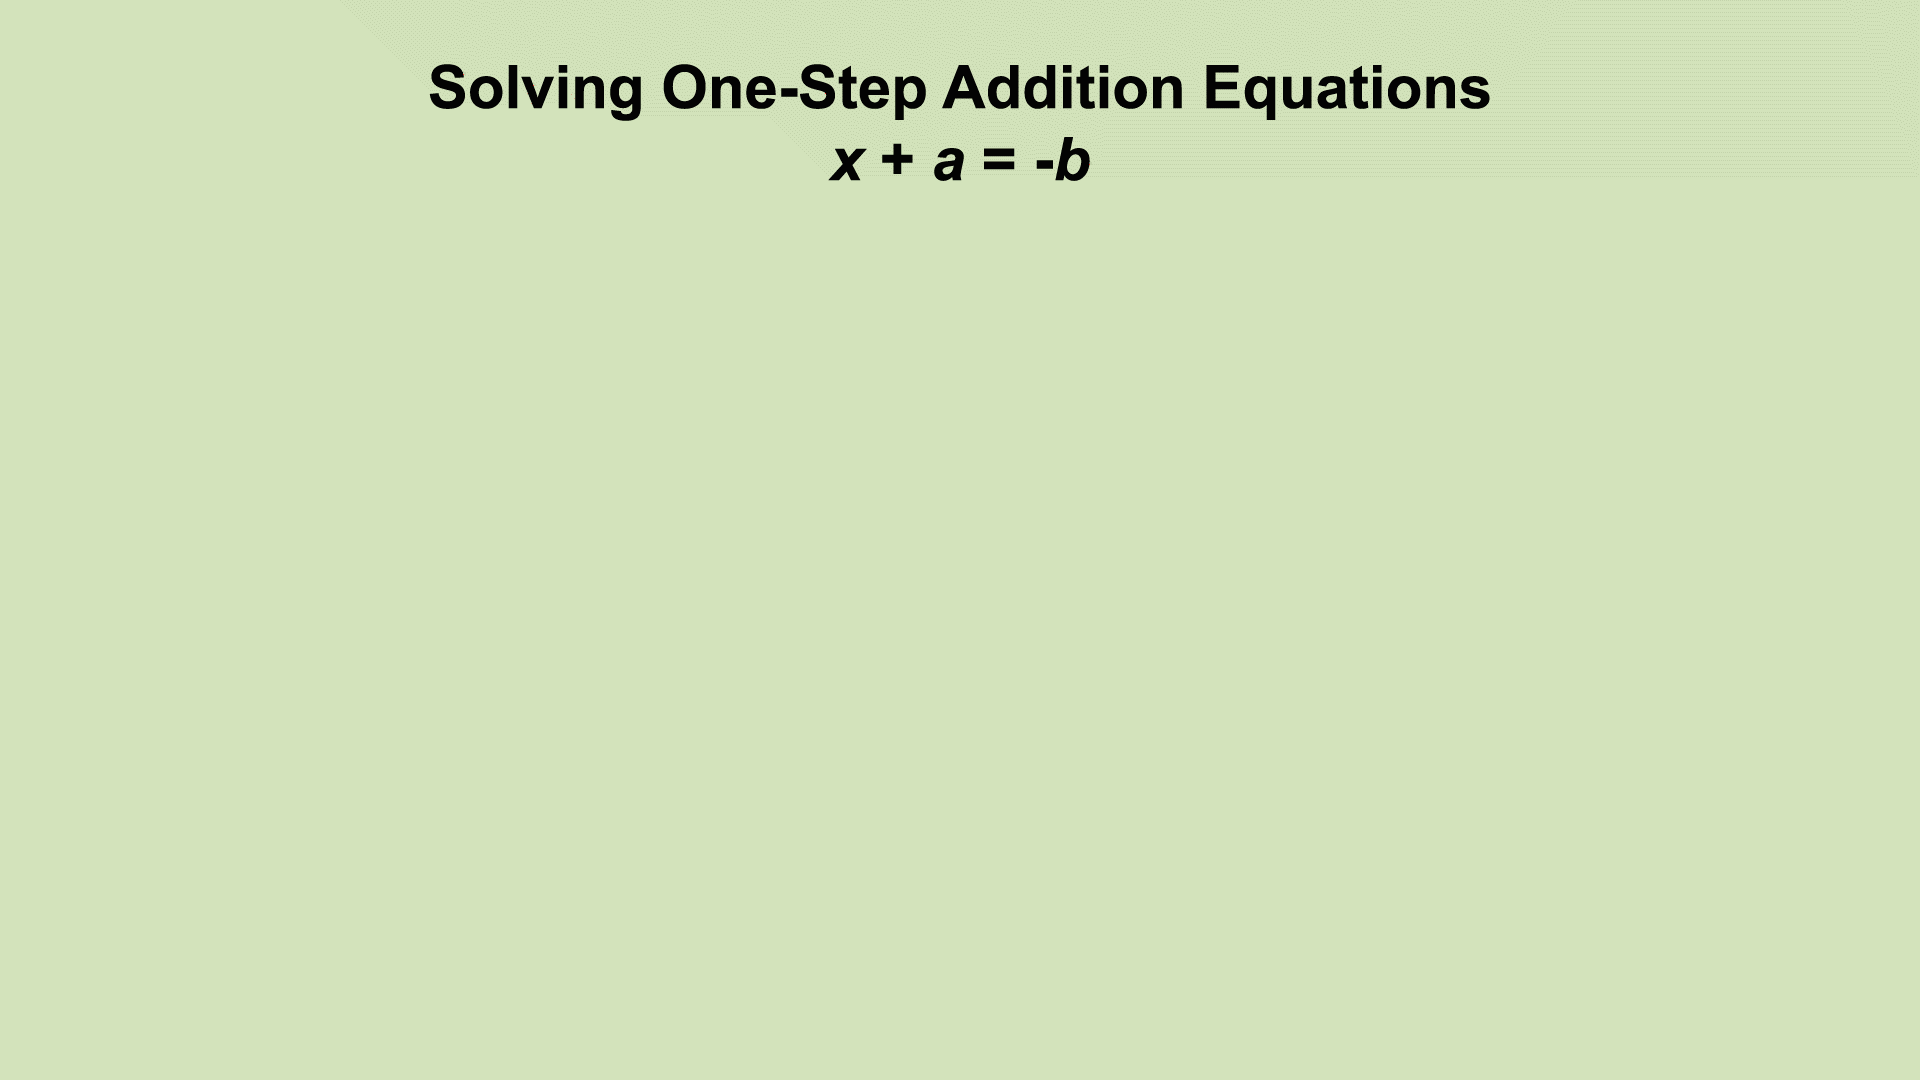 In this example the one-step equation shows addition of a positive number.